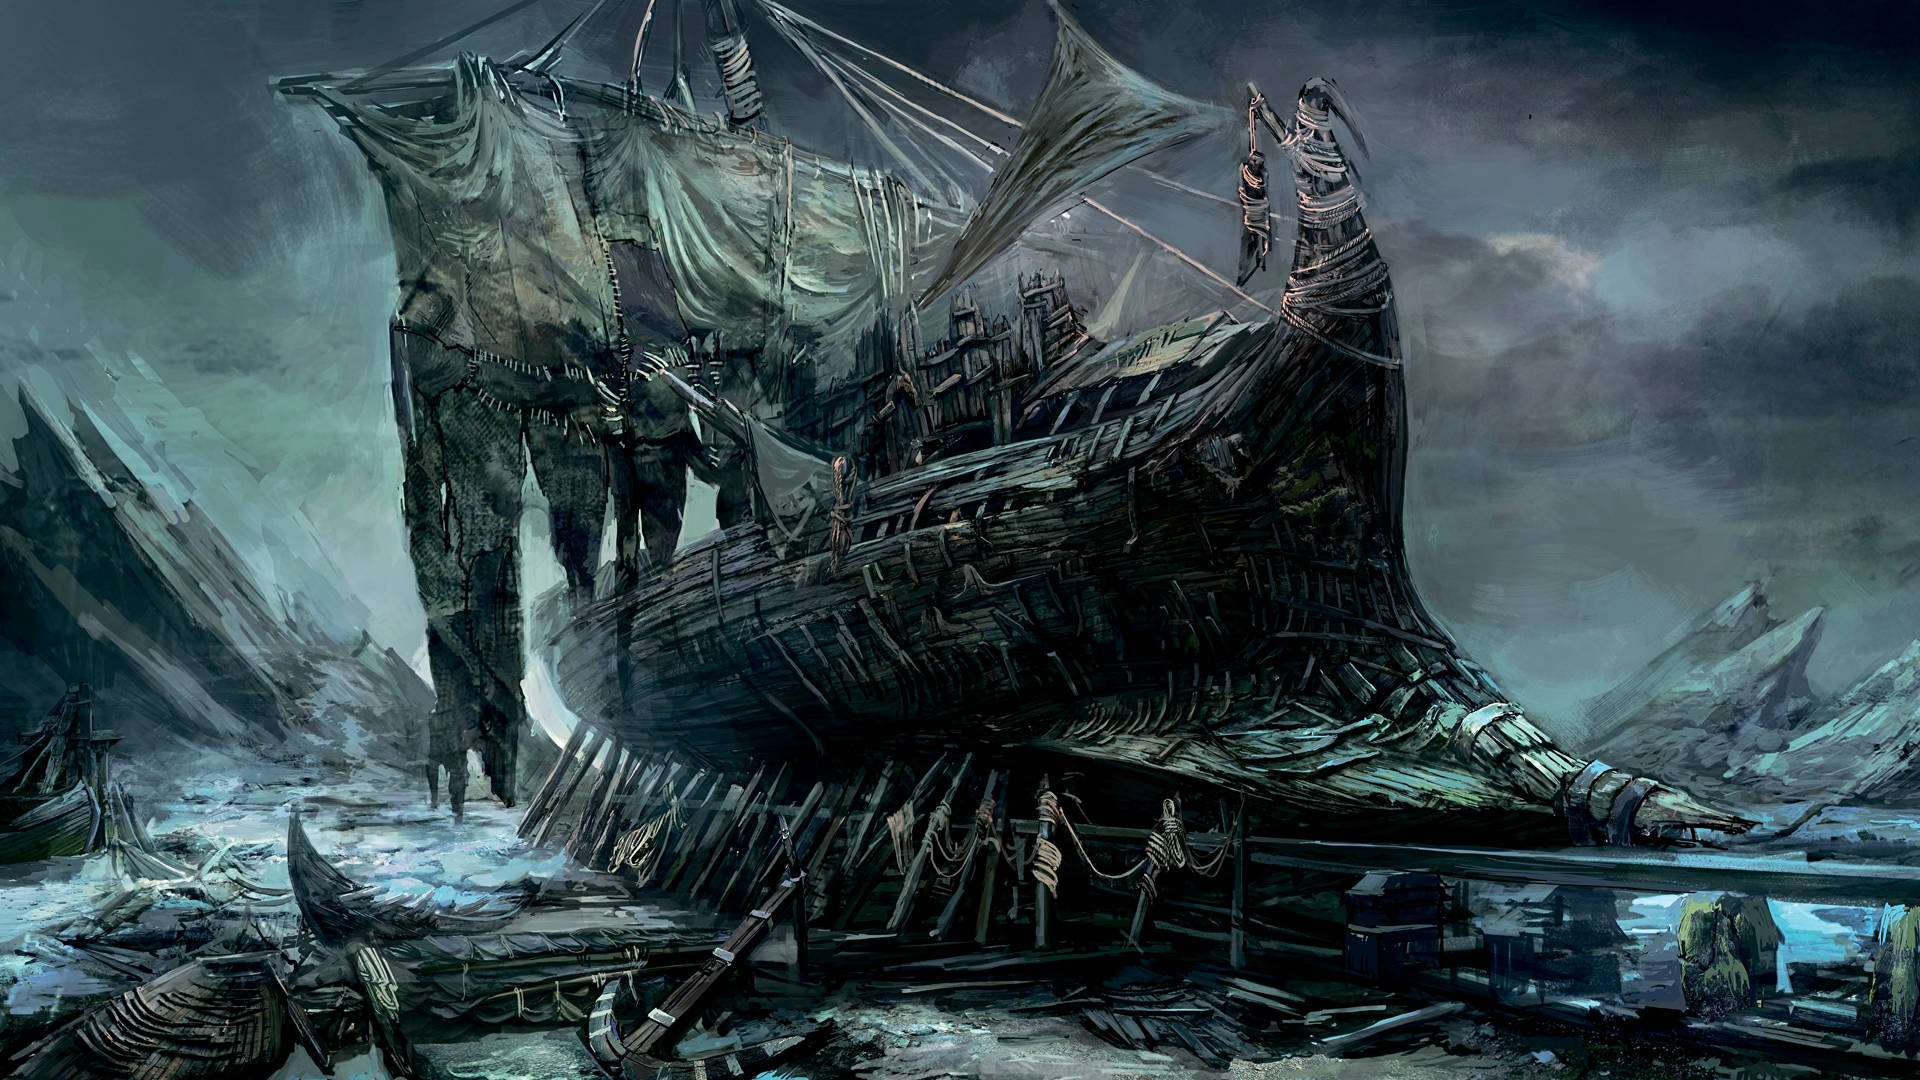 Haunted Ghost Ship Wreck